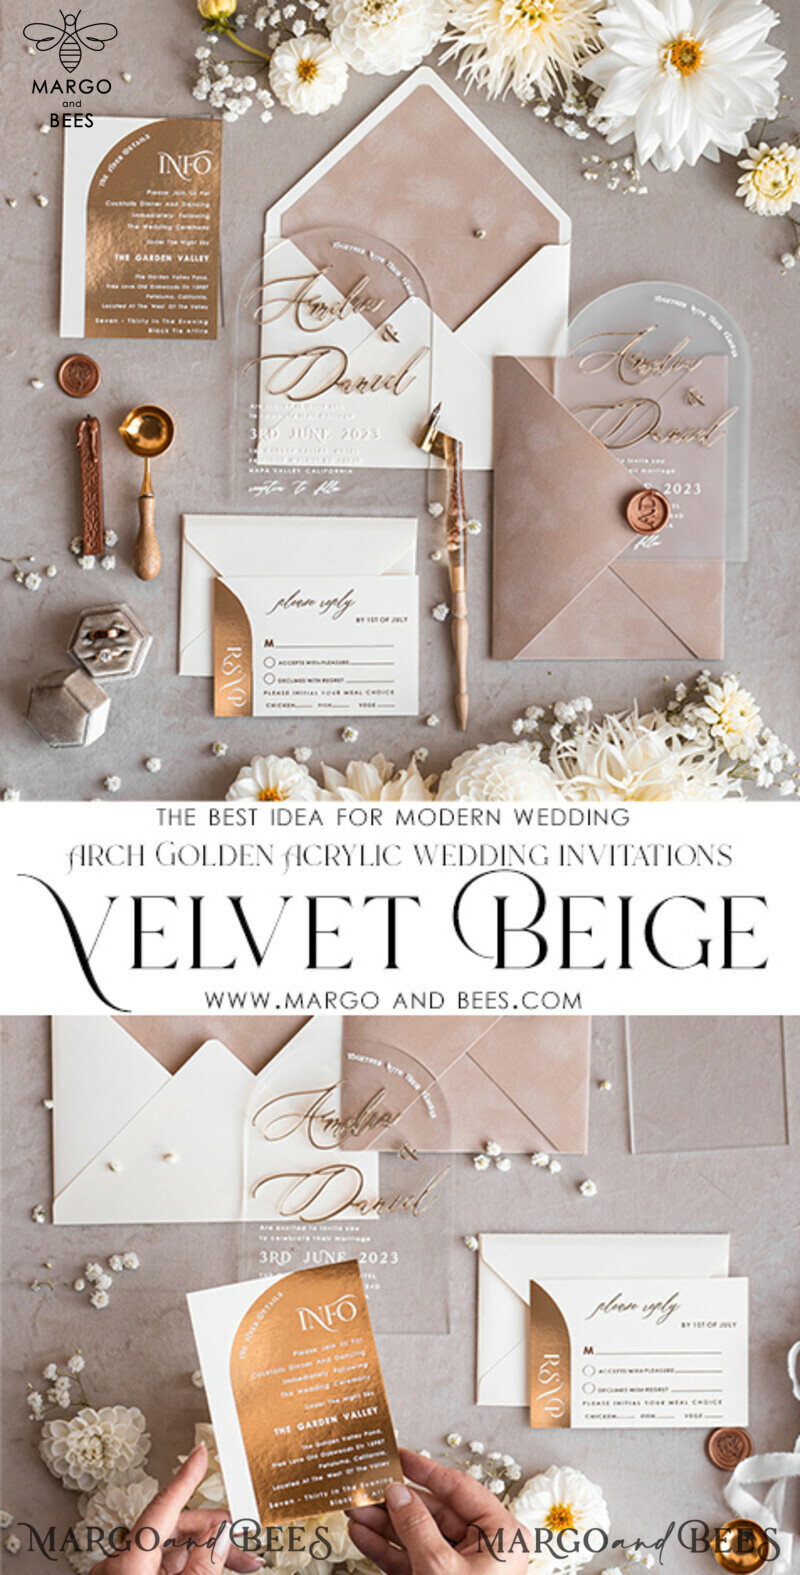 is it cheaper to make your own wedding invitations?-6